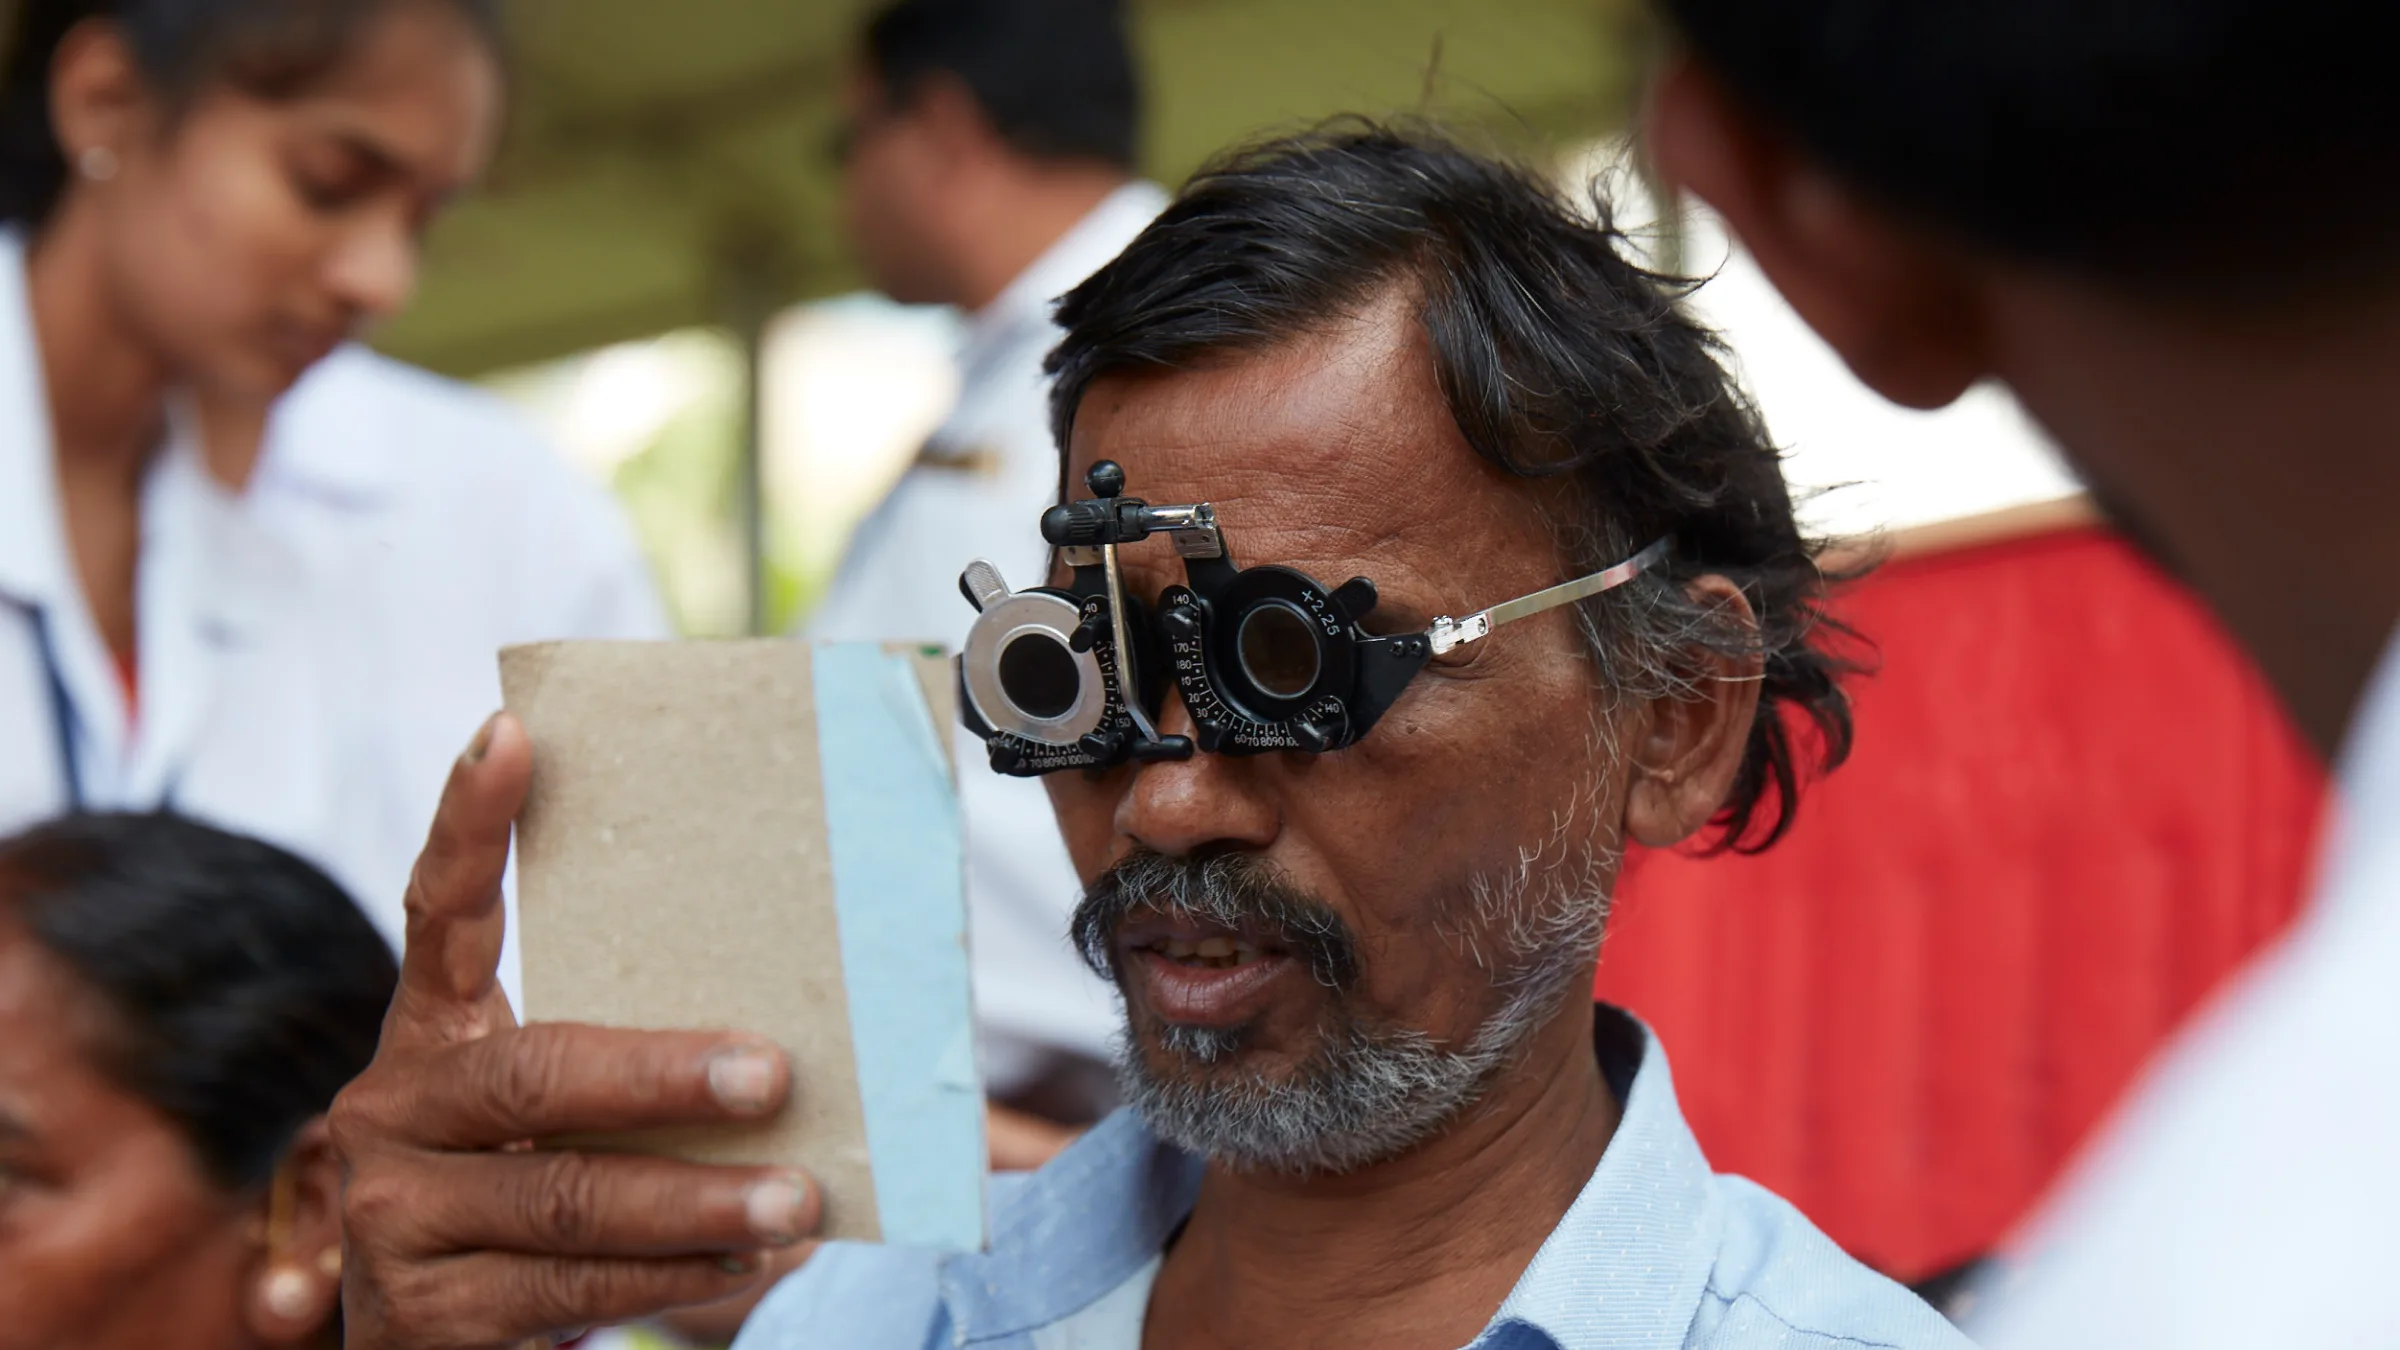 A man wearing glasses is looking at a paper.